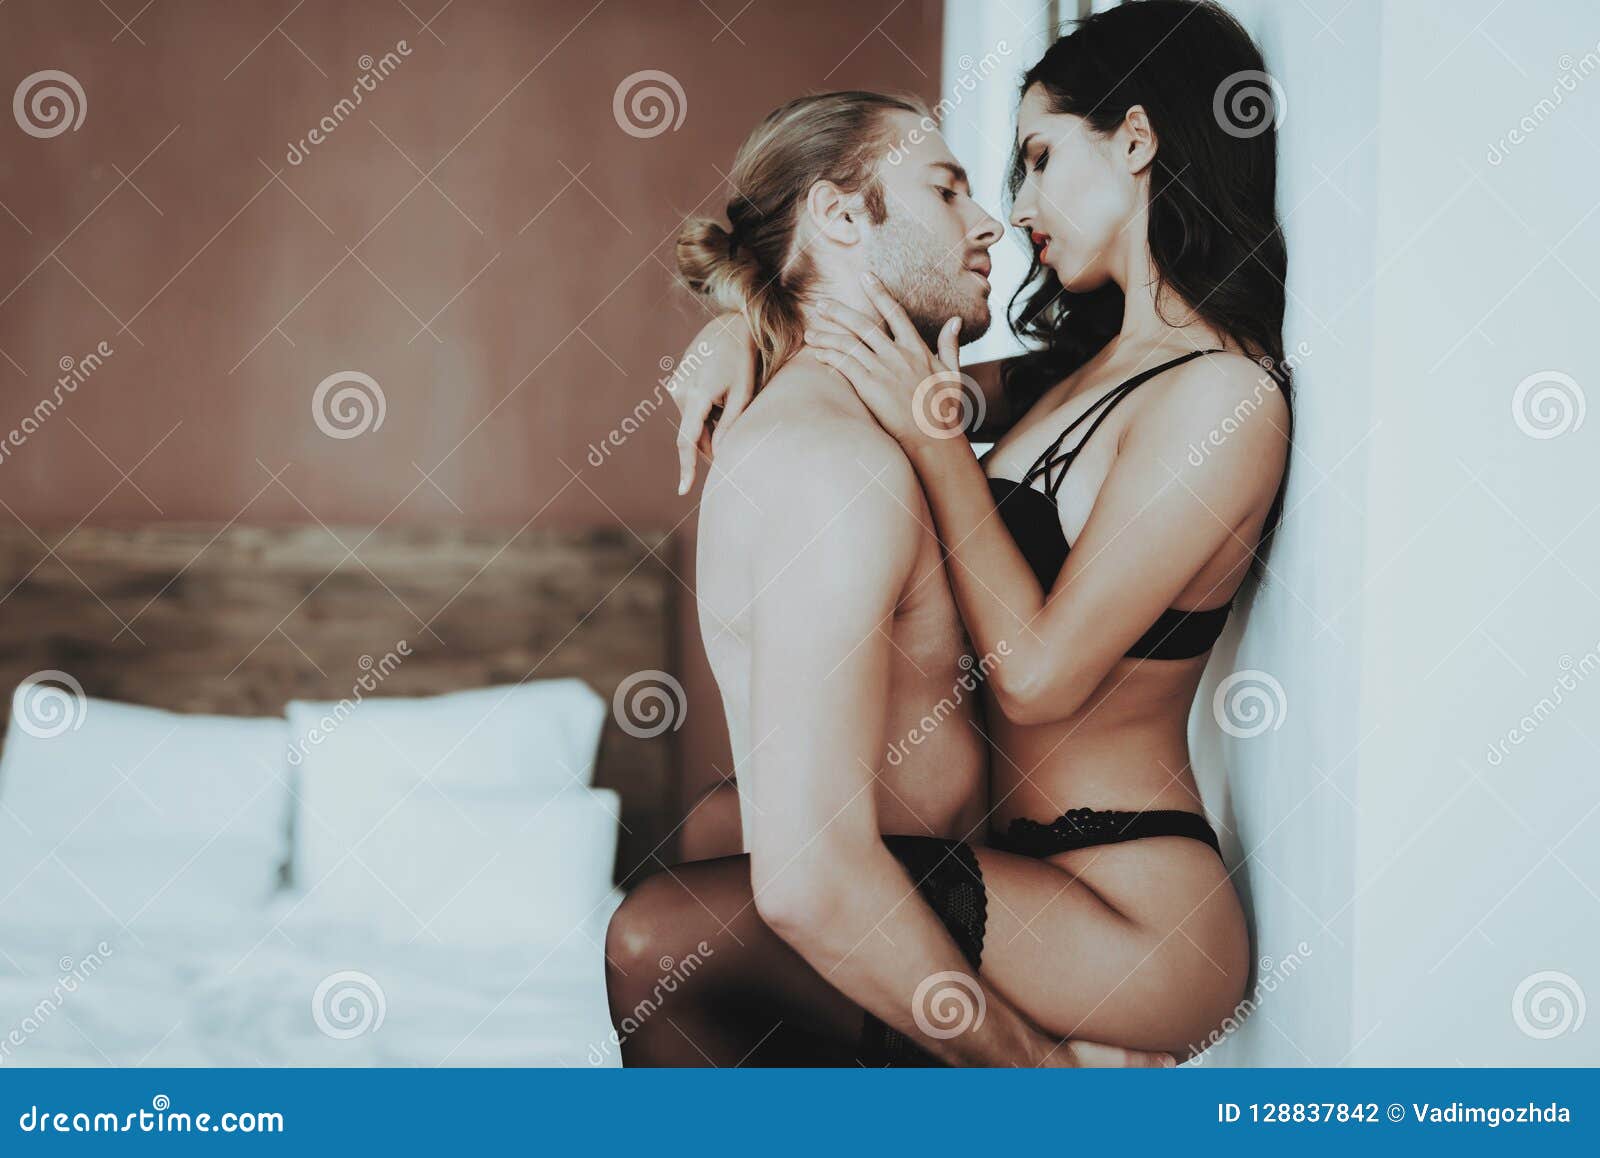 Passionate Man Holding Woman in Lingerie Near Wall Stock Photo